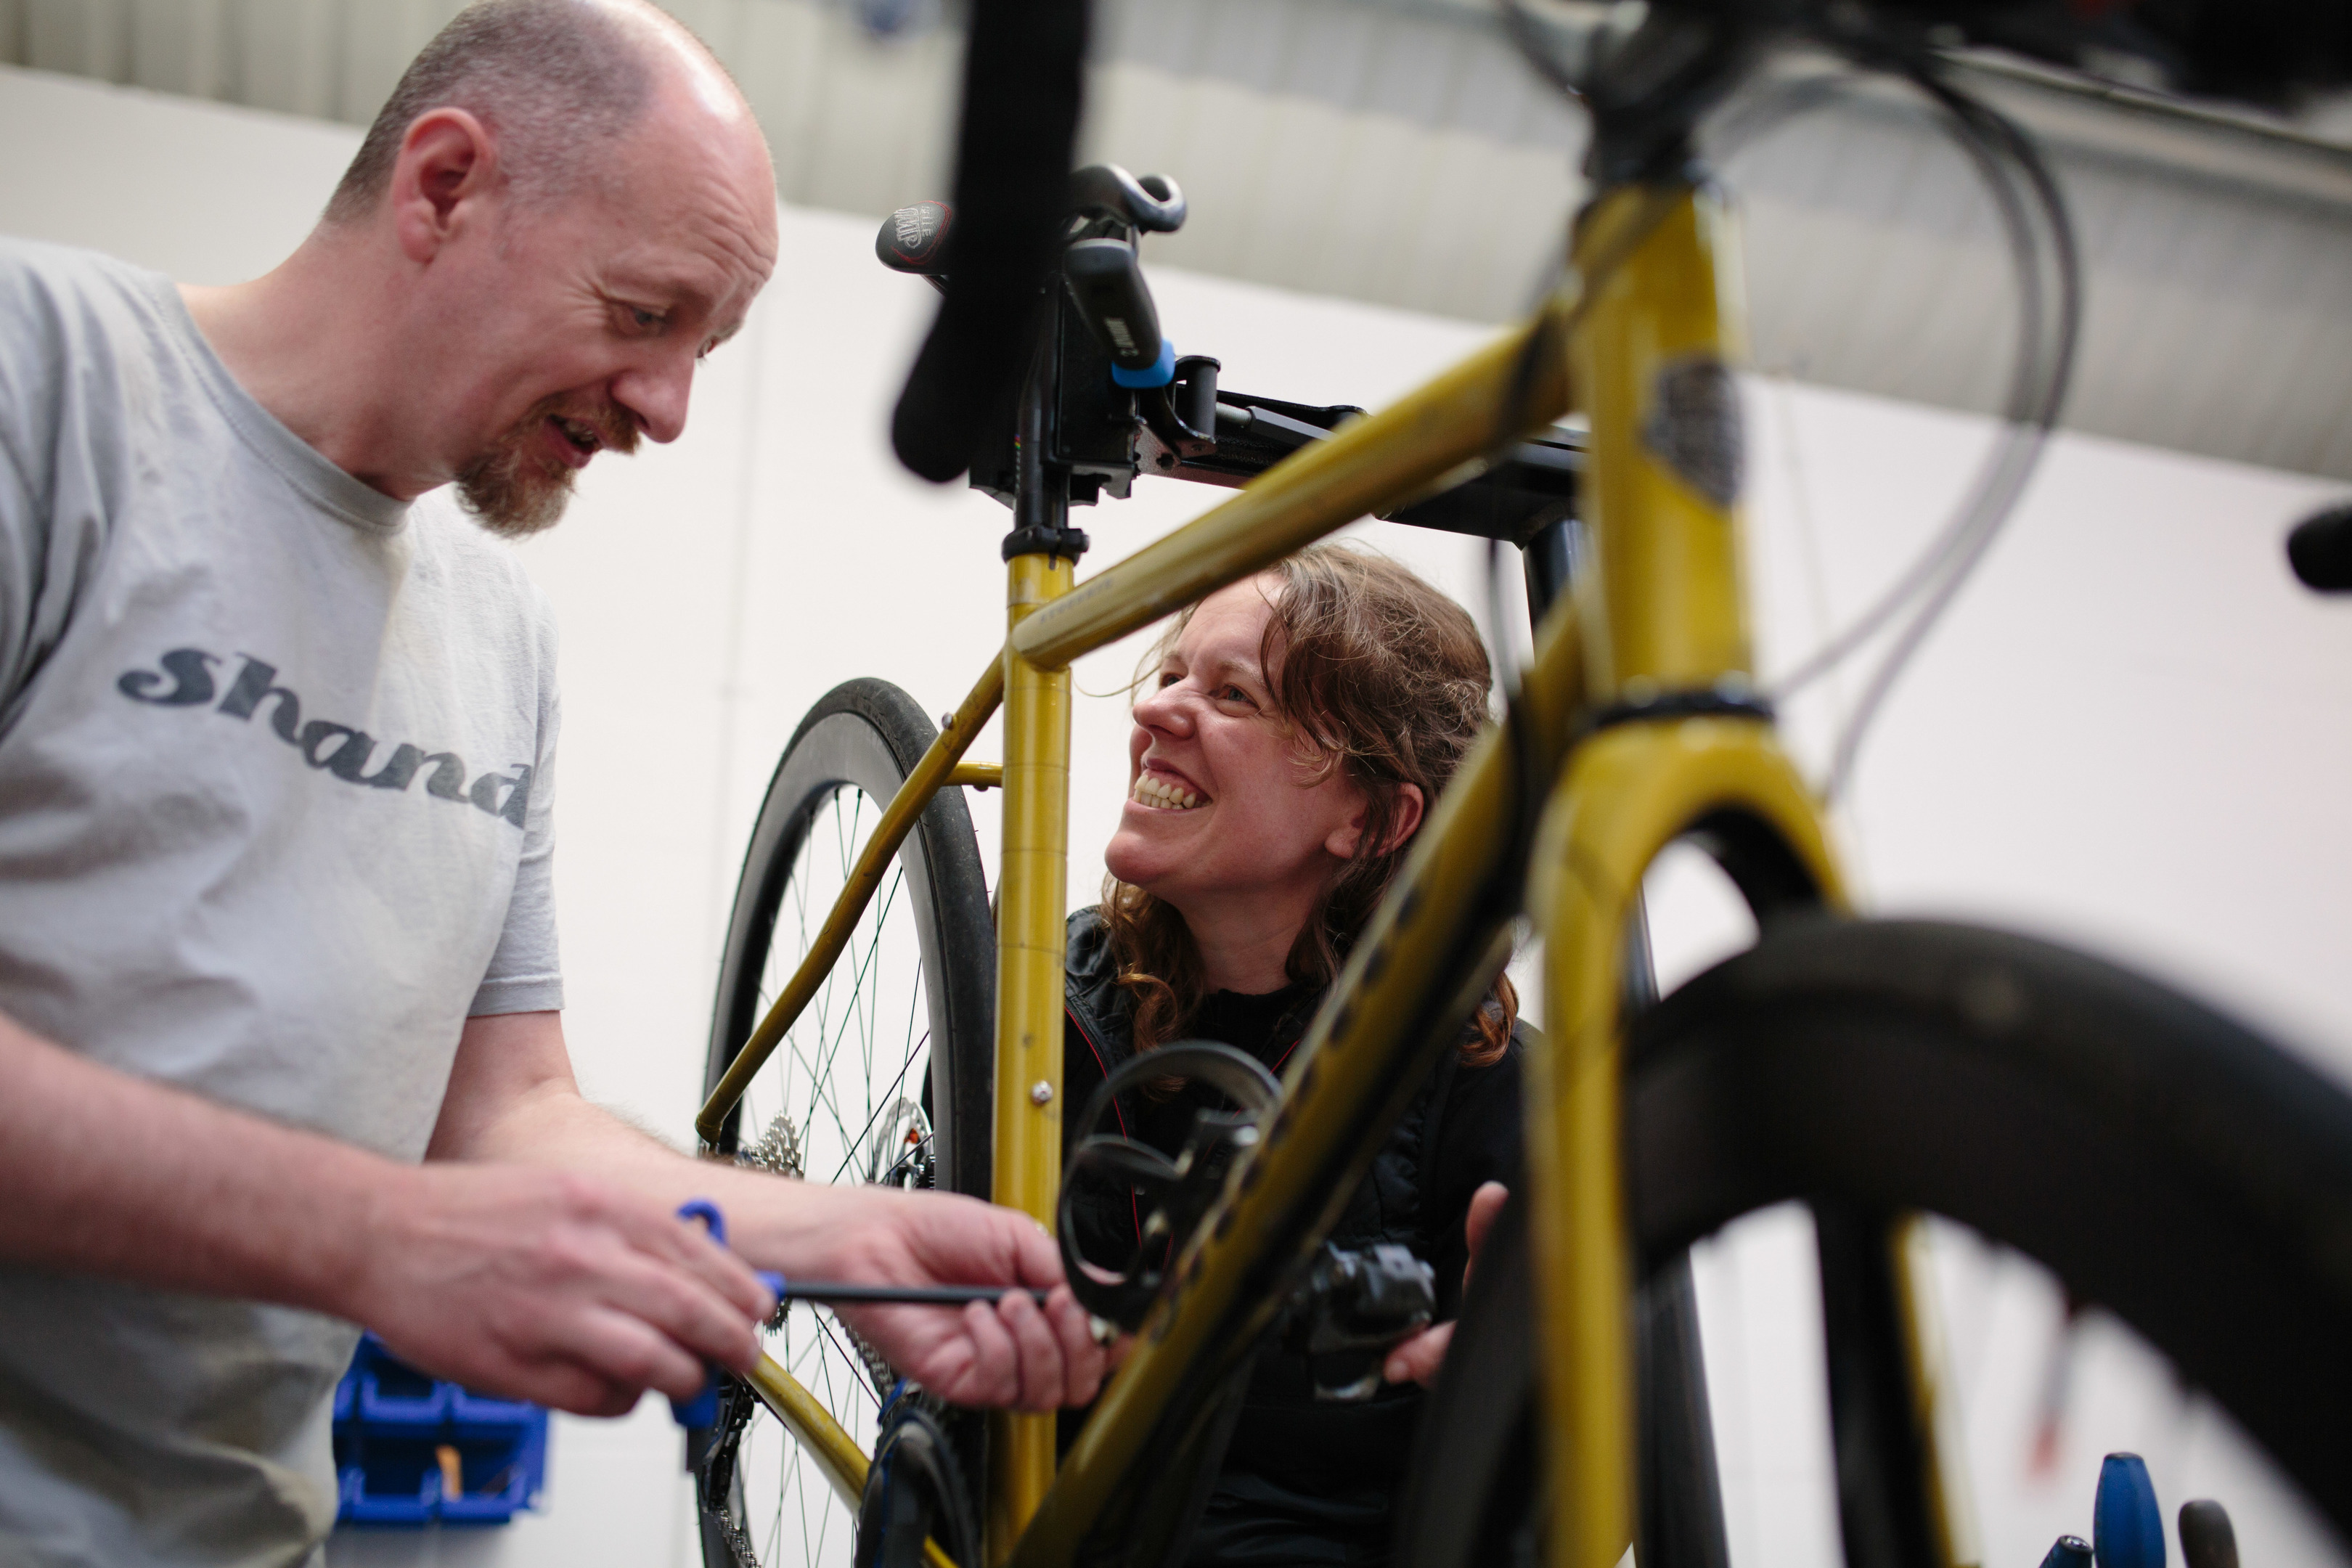 Bike constructor Steven Shand and cyclist Jenny Graham ahead of the challenge this weekend